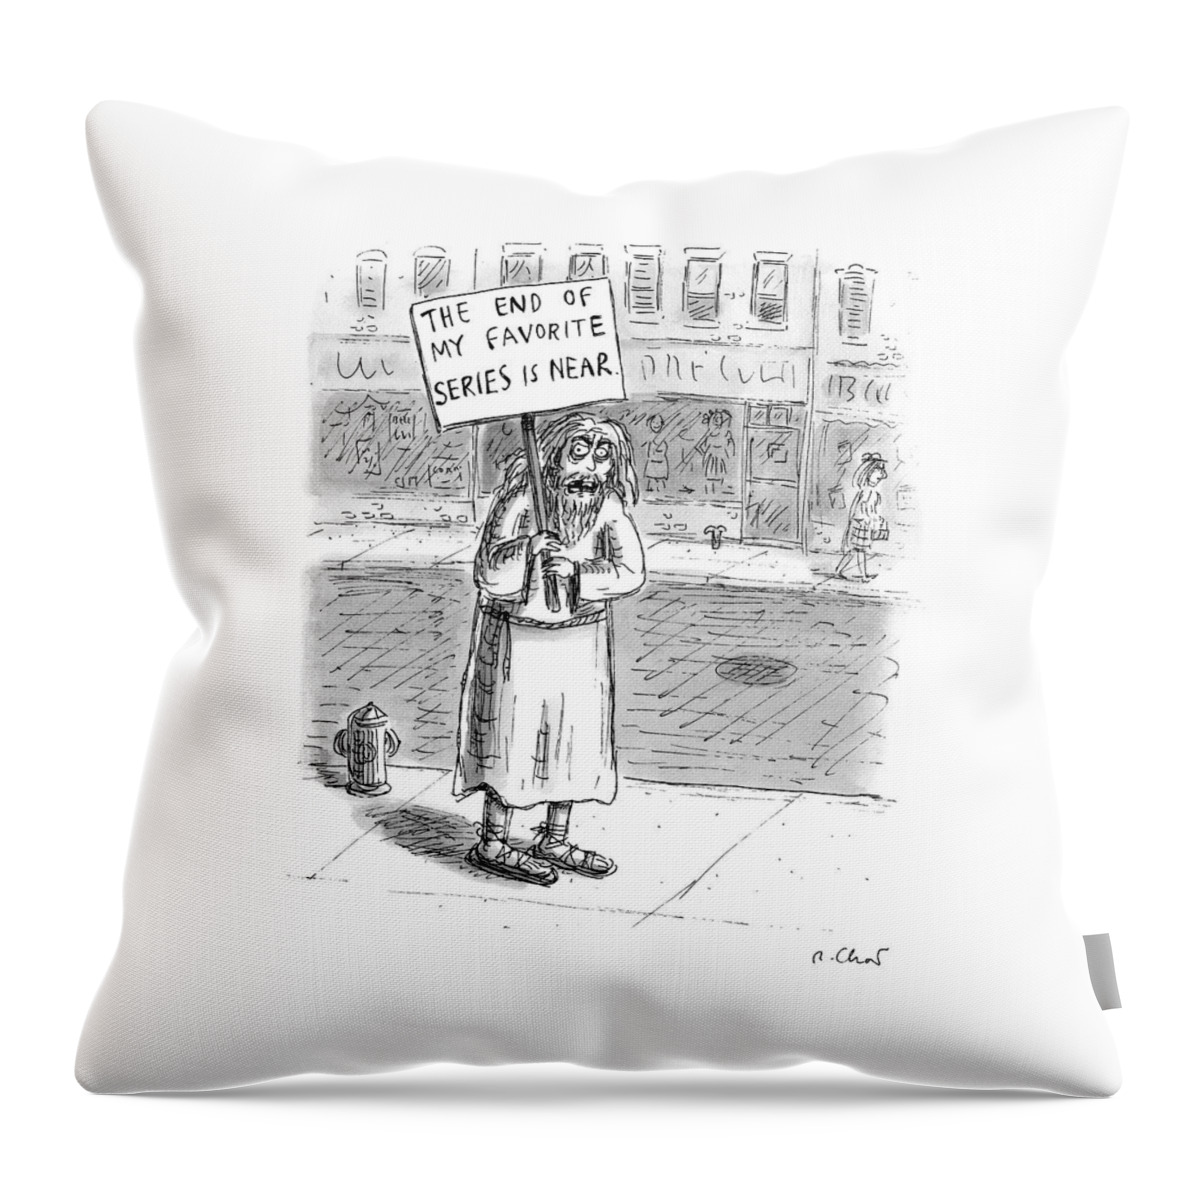 A Man In Torn Clothing On The Sidewalk Holds Throw Pillow